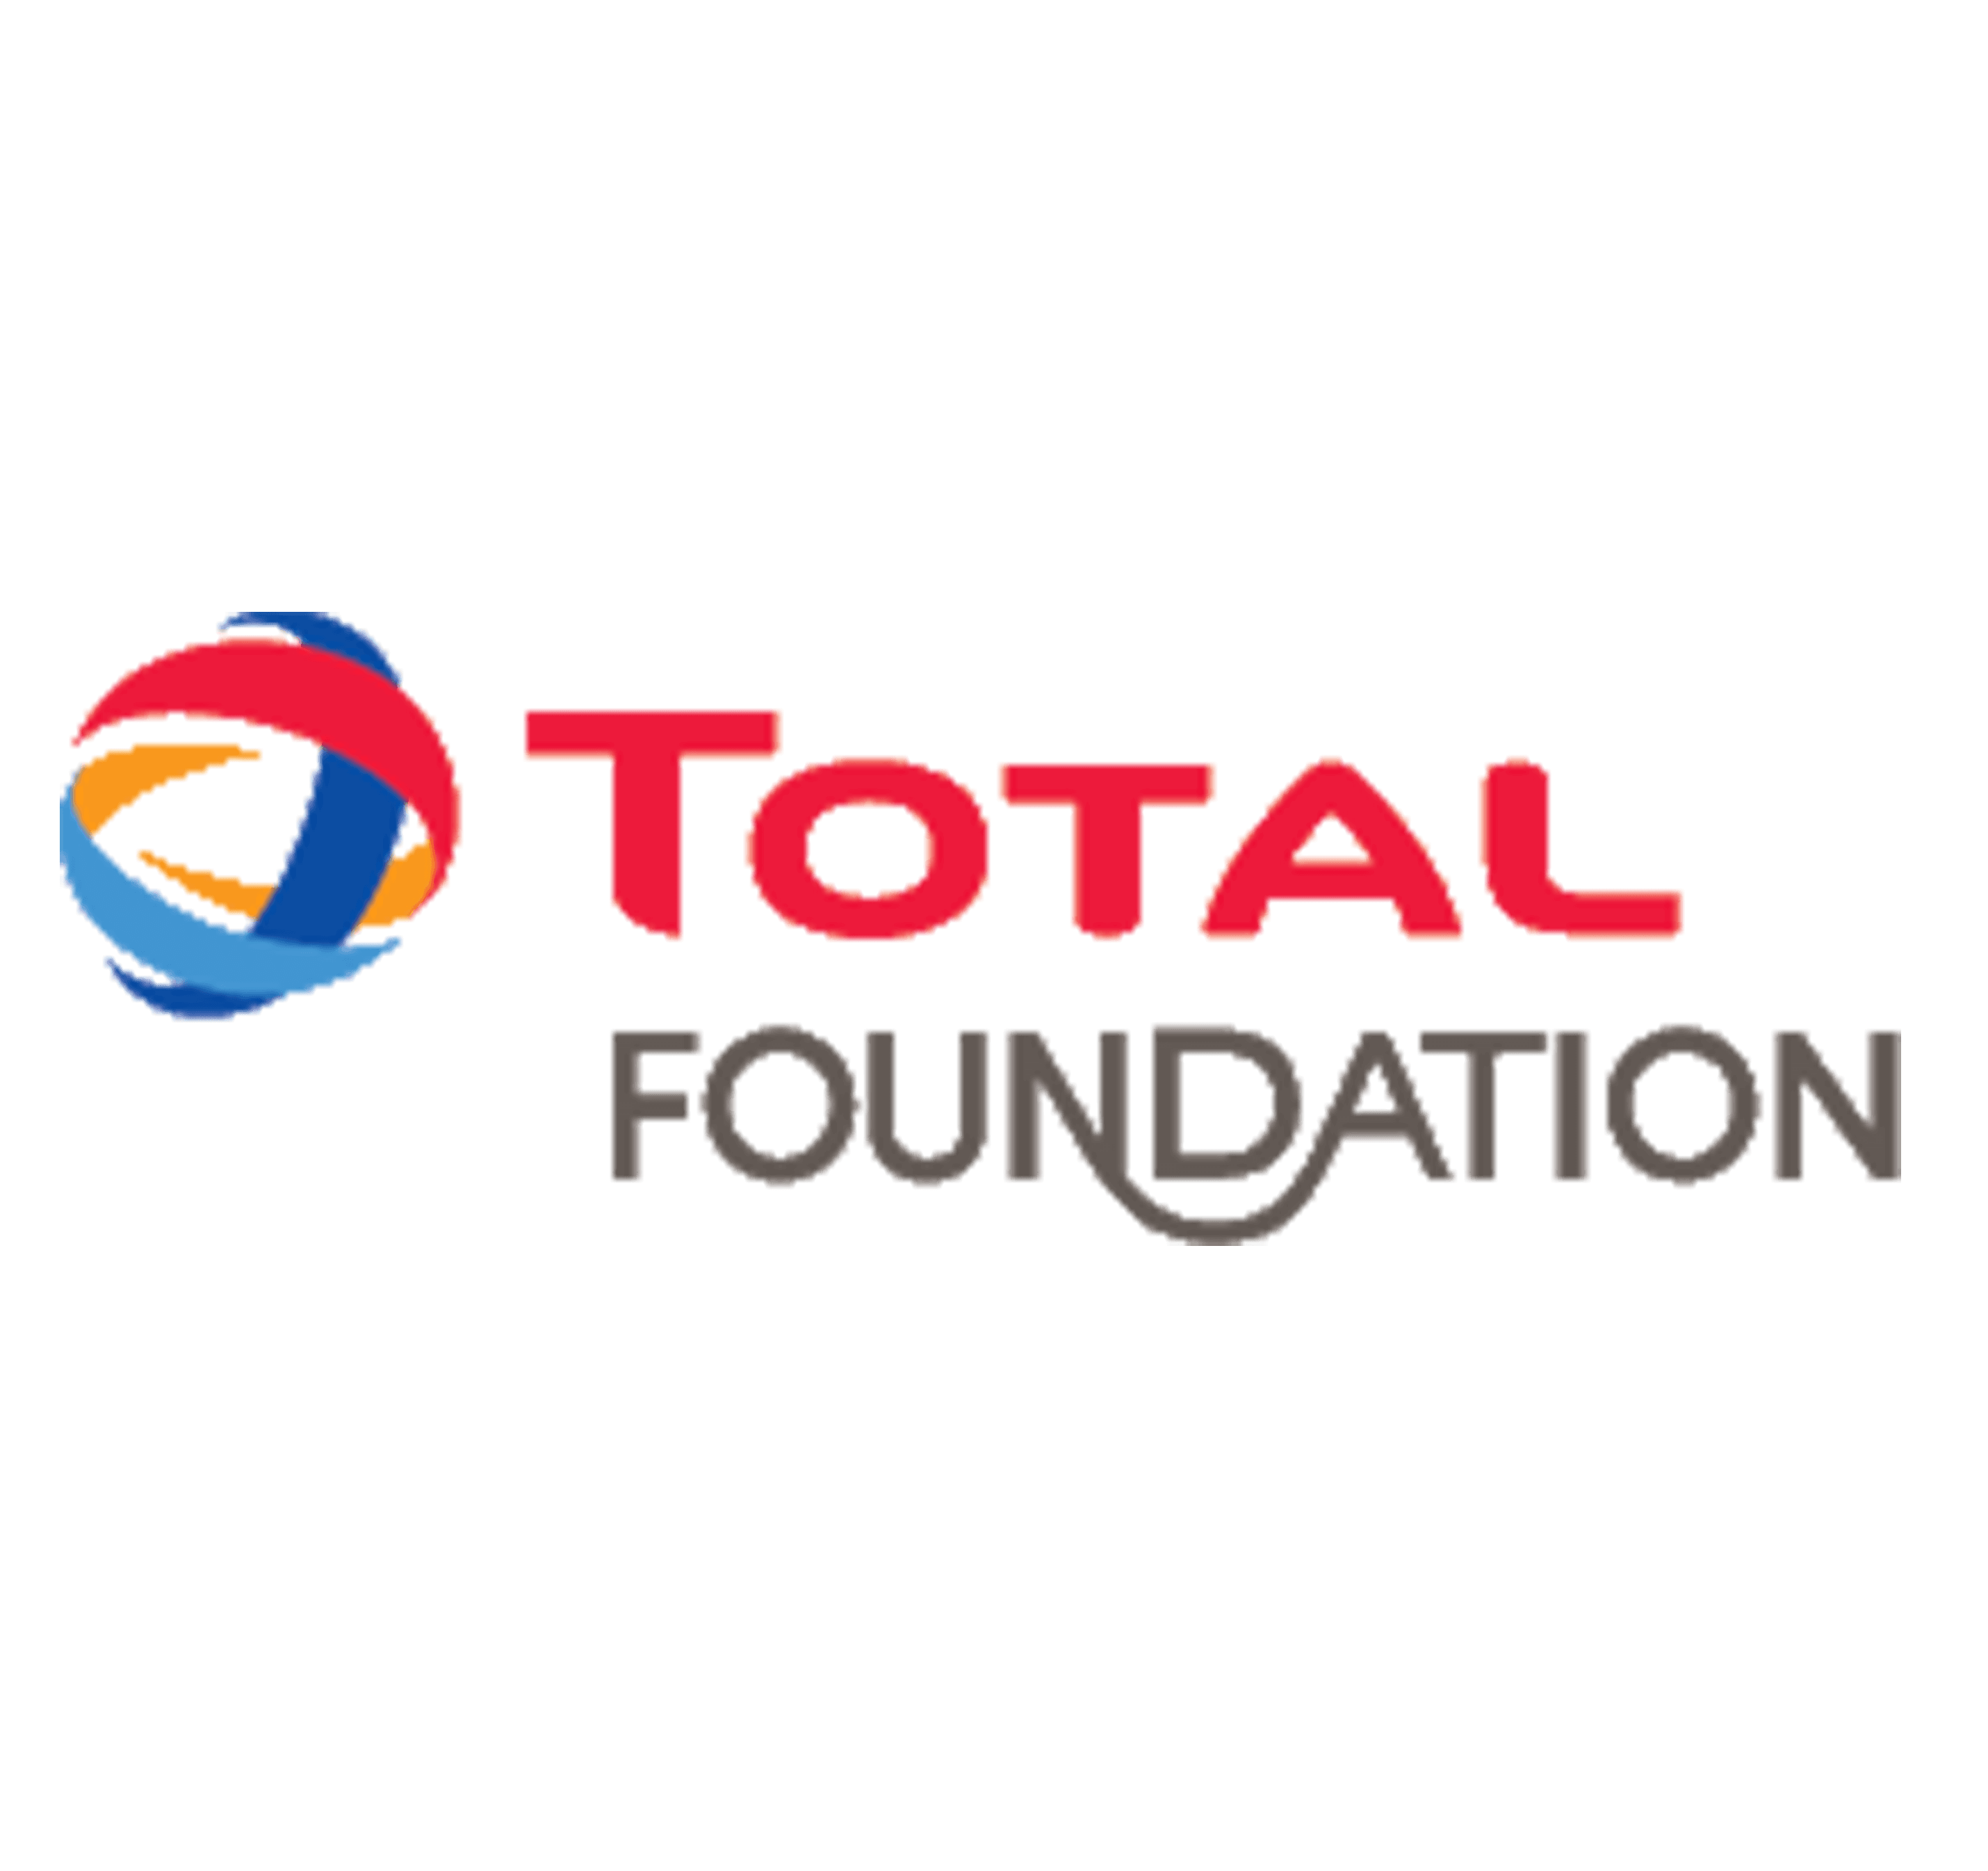 Logo of Total Foundation